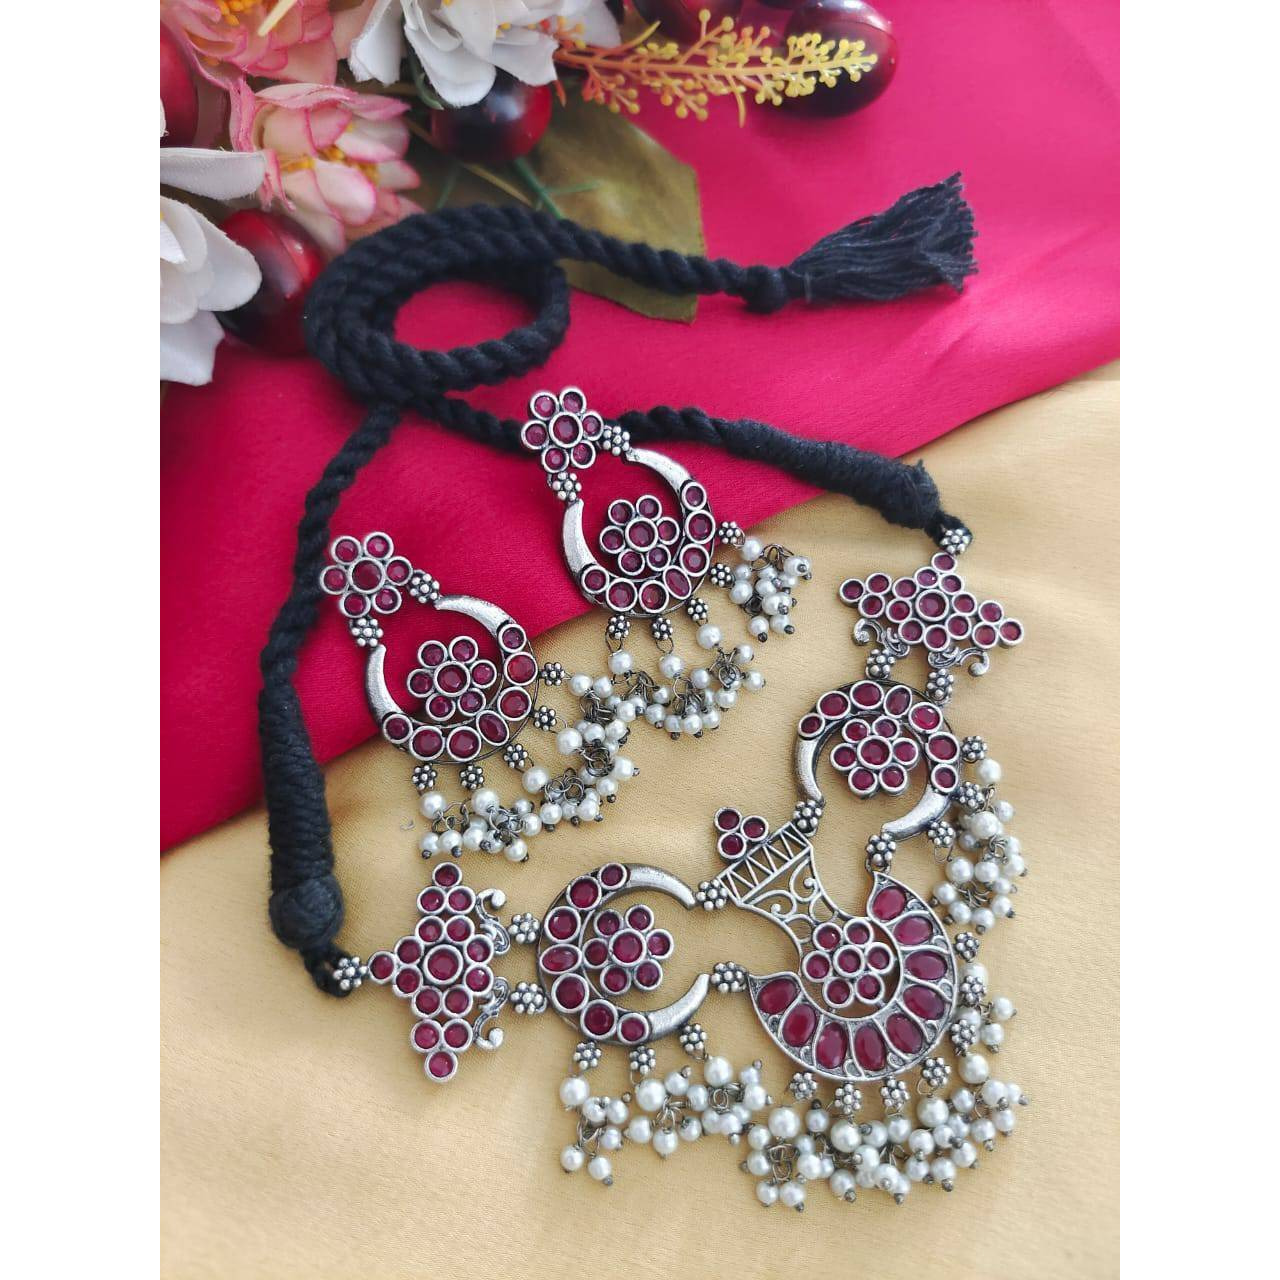 Delve into the world of finely crafted classics that powerfully capture the beauty of modern Indian craftsmanship. This elegant pair of oxidised silver plated earrings and maangtikka dressed up with tinkling pearl hangings and delicate filigree & peacock details, is one of our personal favourites. These earrings make effortless addition to your white hued attires, be it indian or western. A funky pair that can be used practically everyday and with various outfits and will definitely add to your